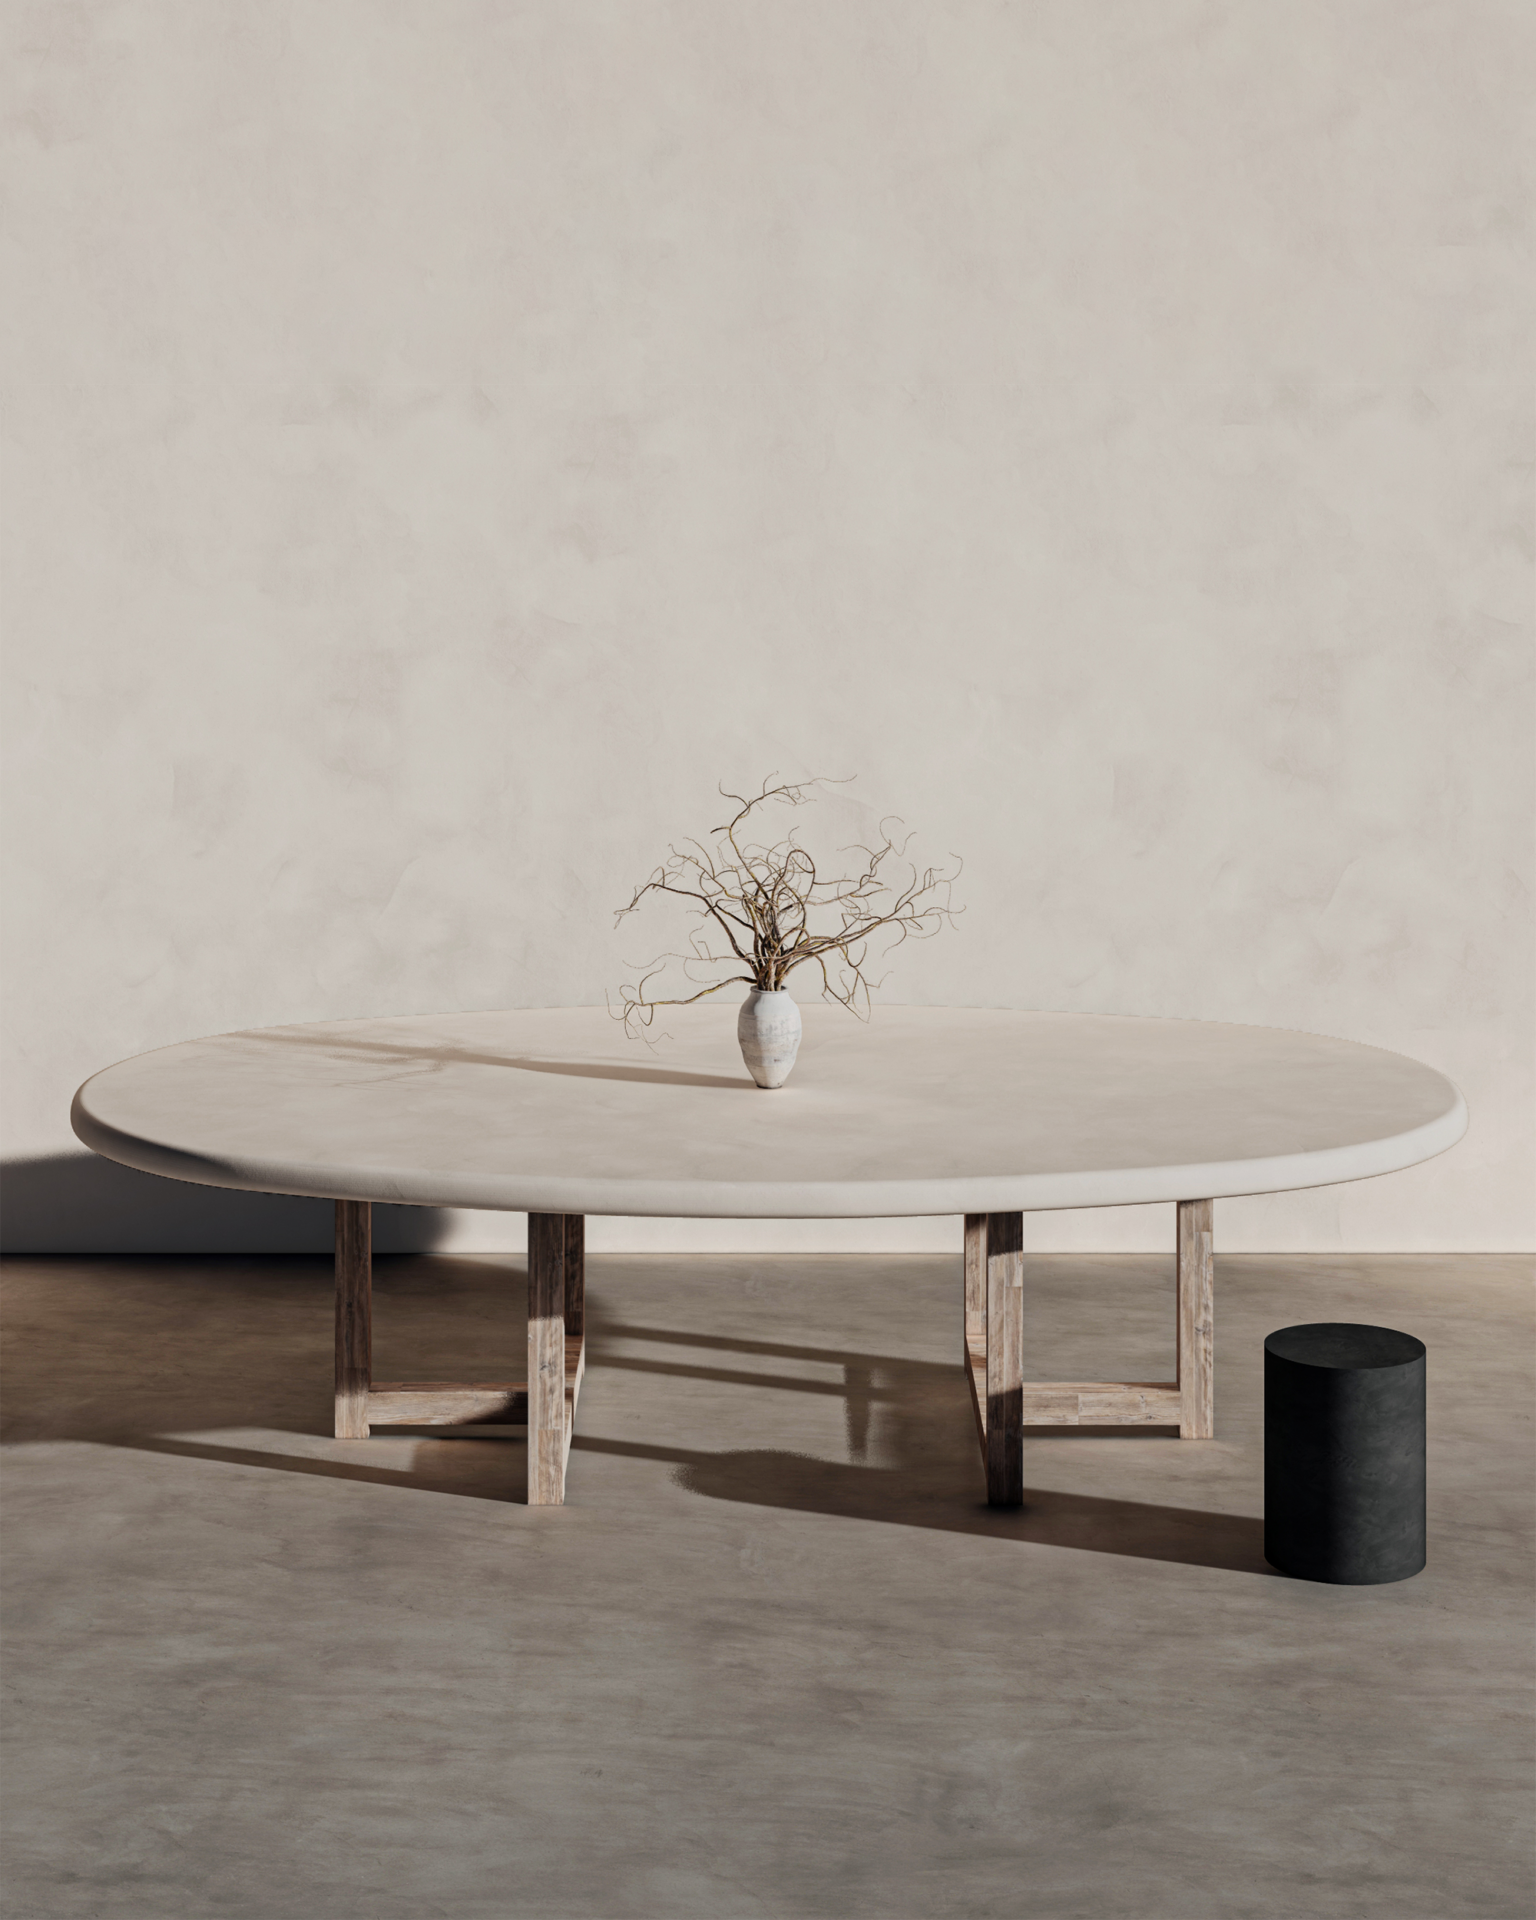 Studio Straf_Oval Dining Table With Wooden Legs_Case Goods_Studio Fenice_